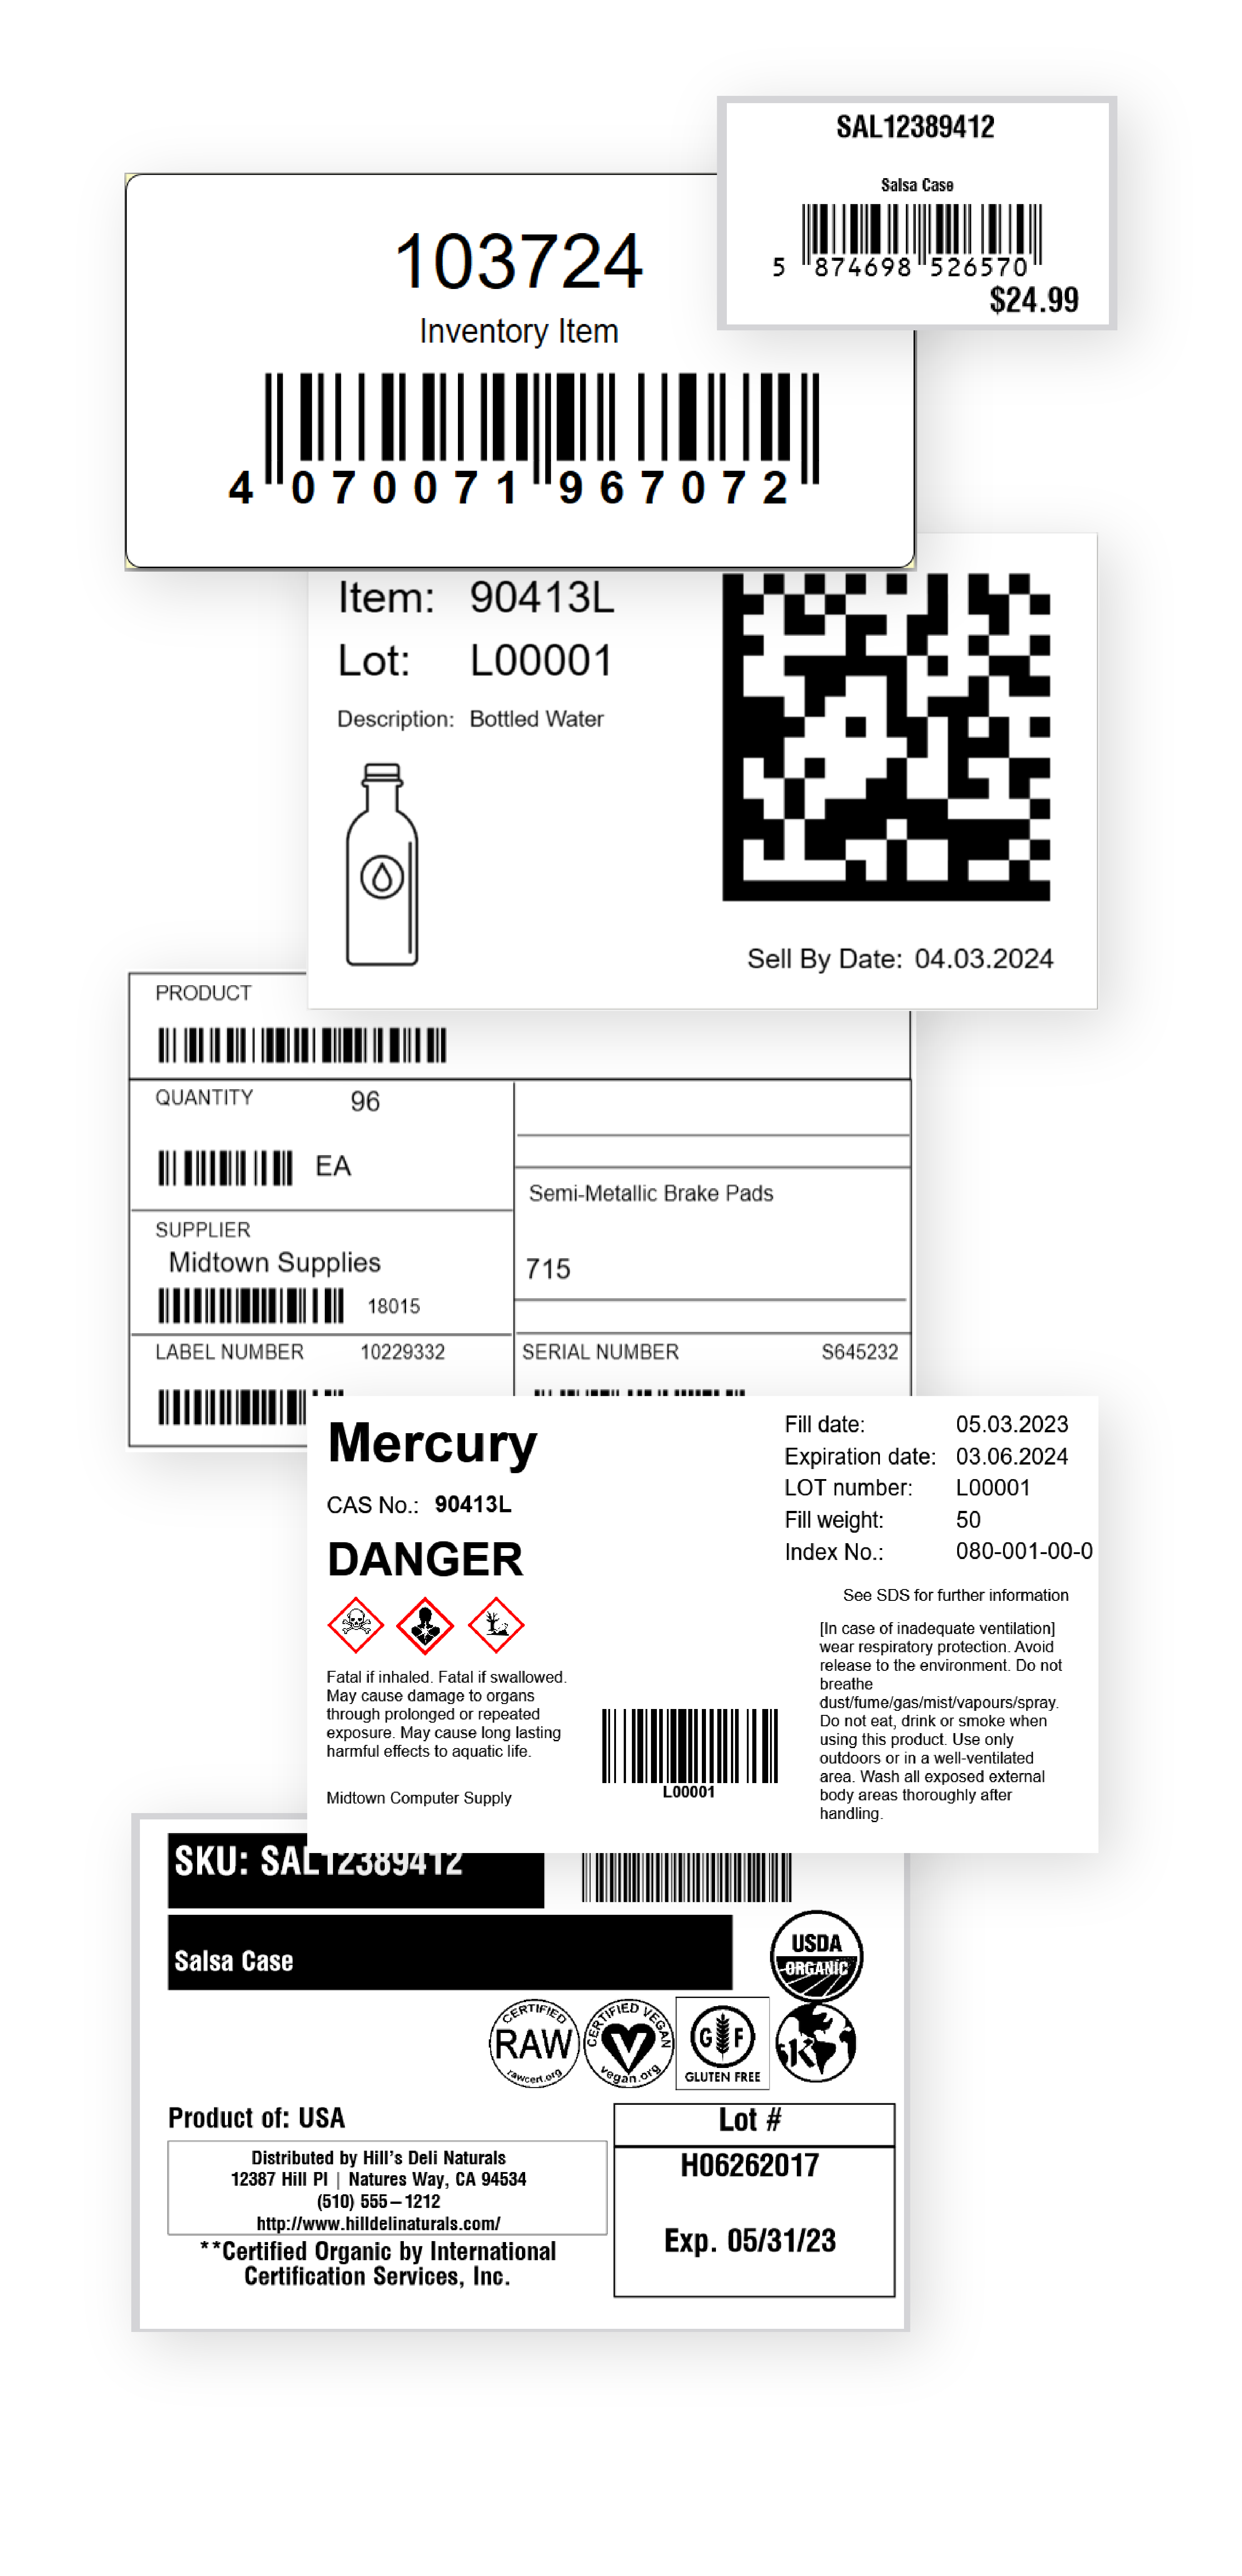 SummitIT Labels for label printing with barcodes and details